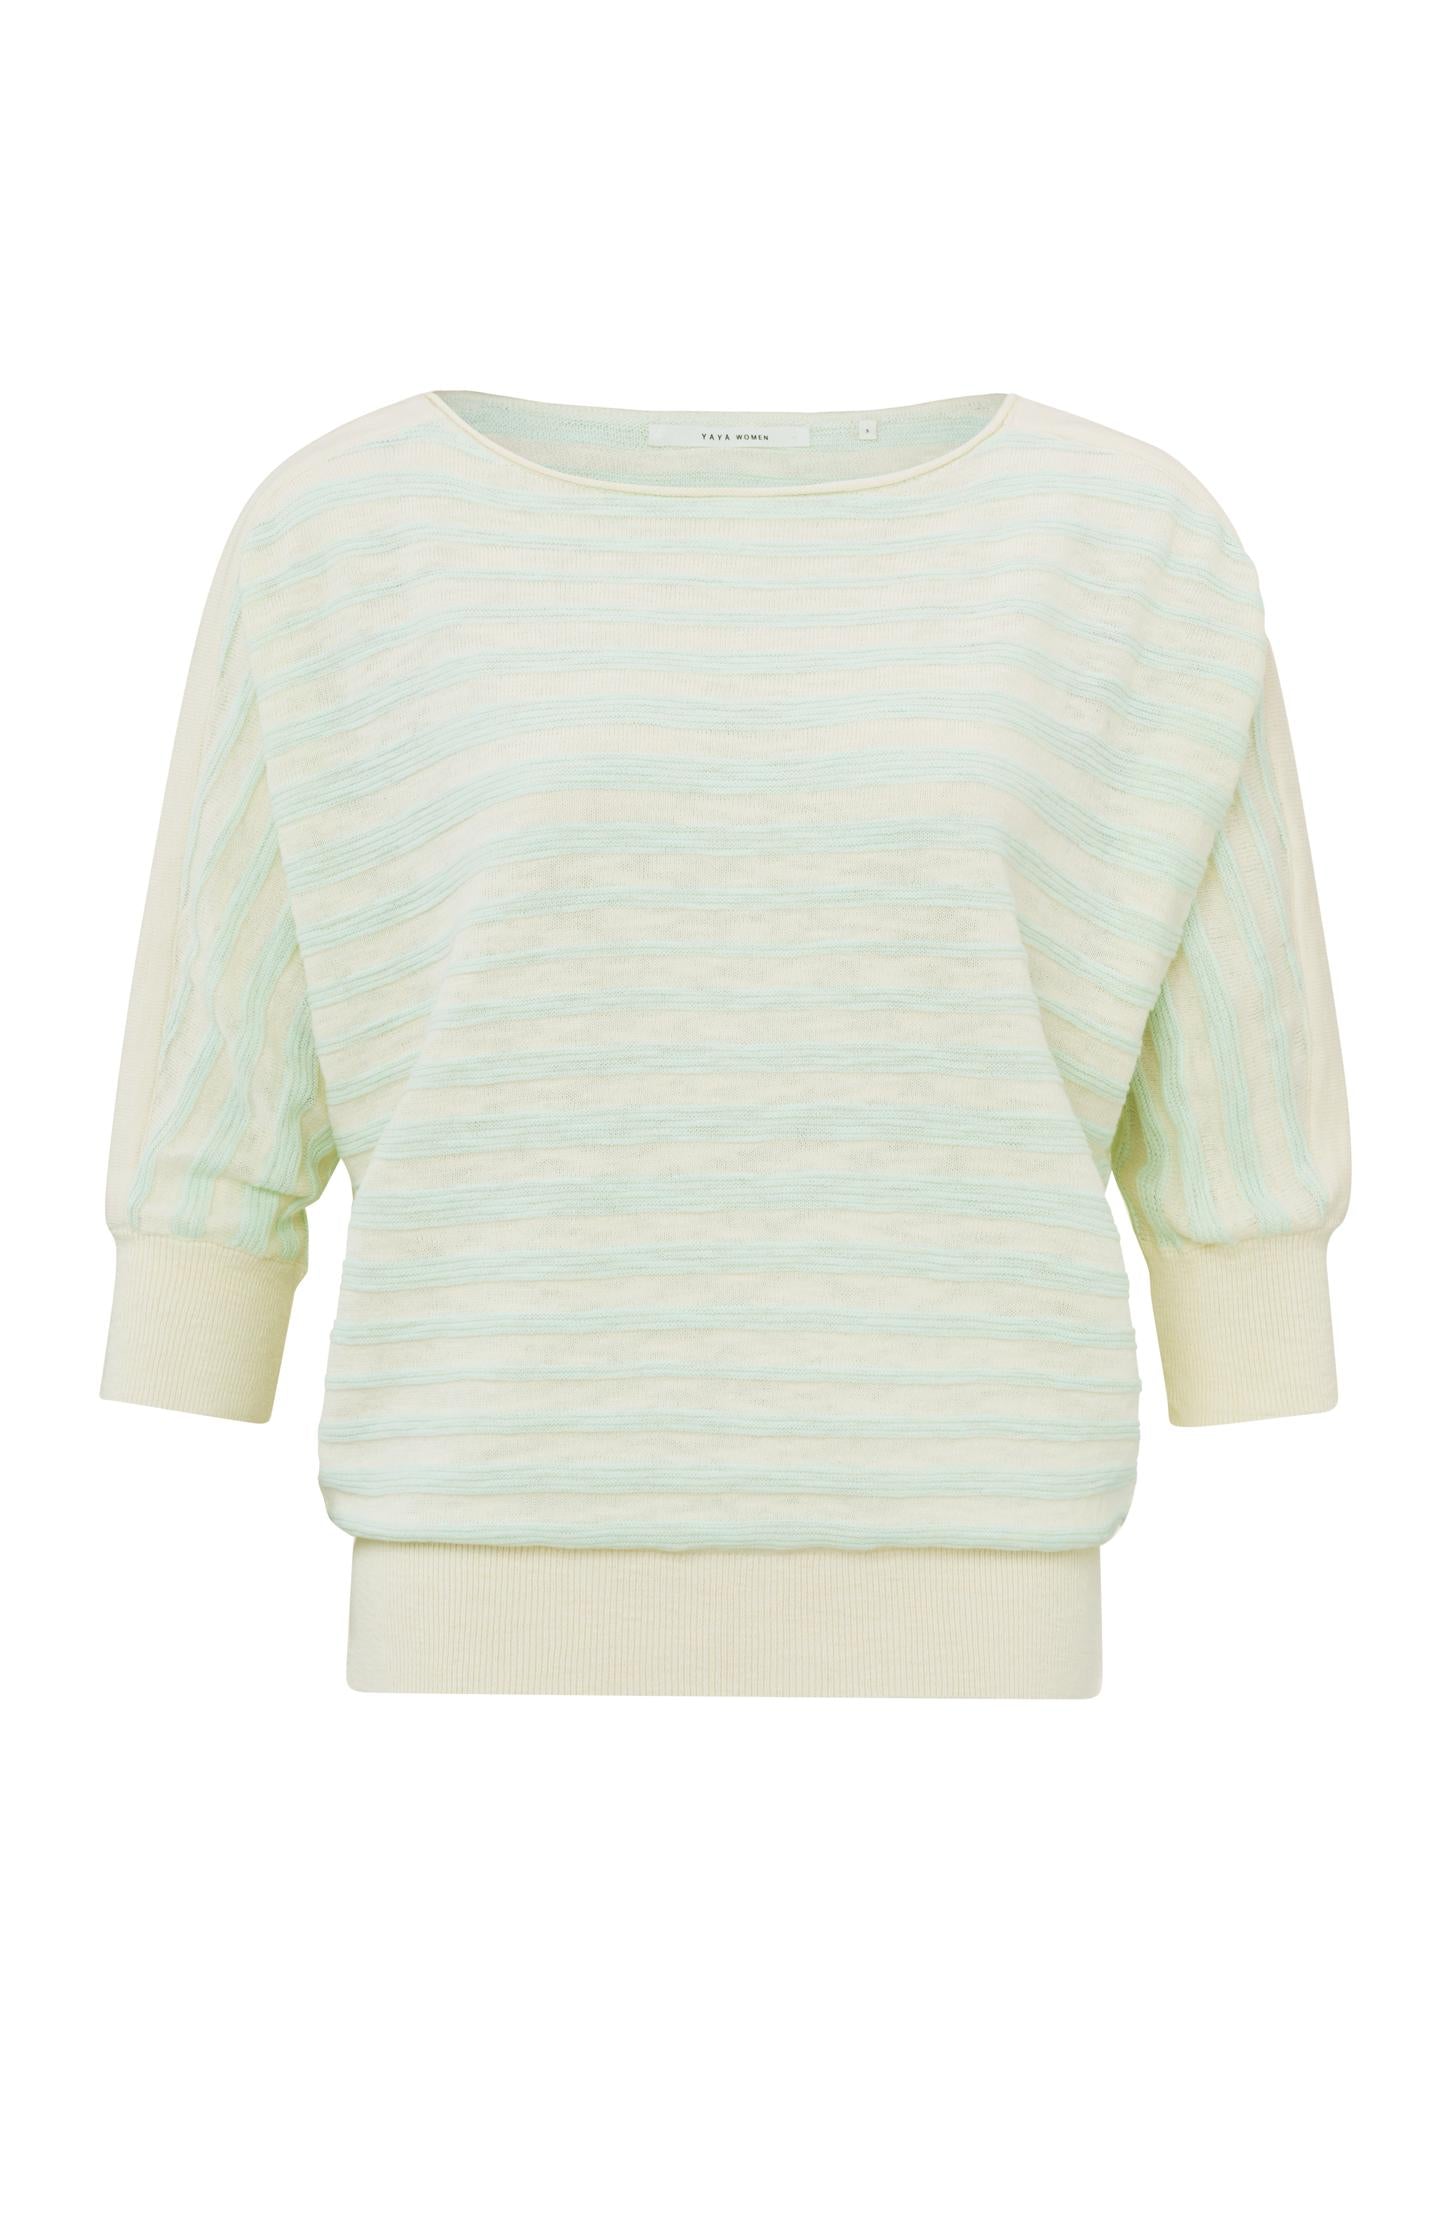 Batwing sweater with boatneck, half long sleeves and stripes - Hint Of Mint Green Dessin - Type: product